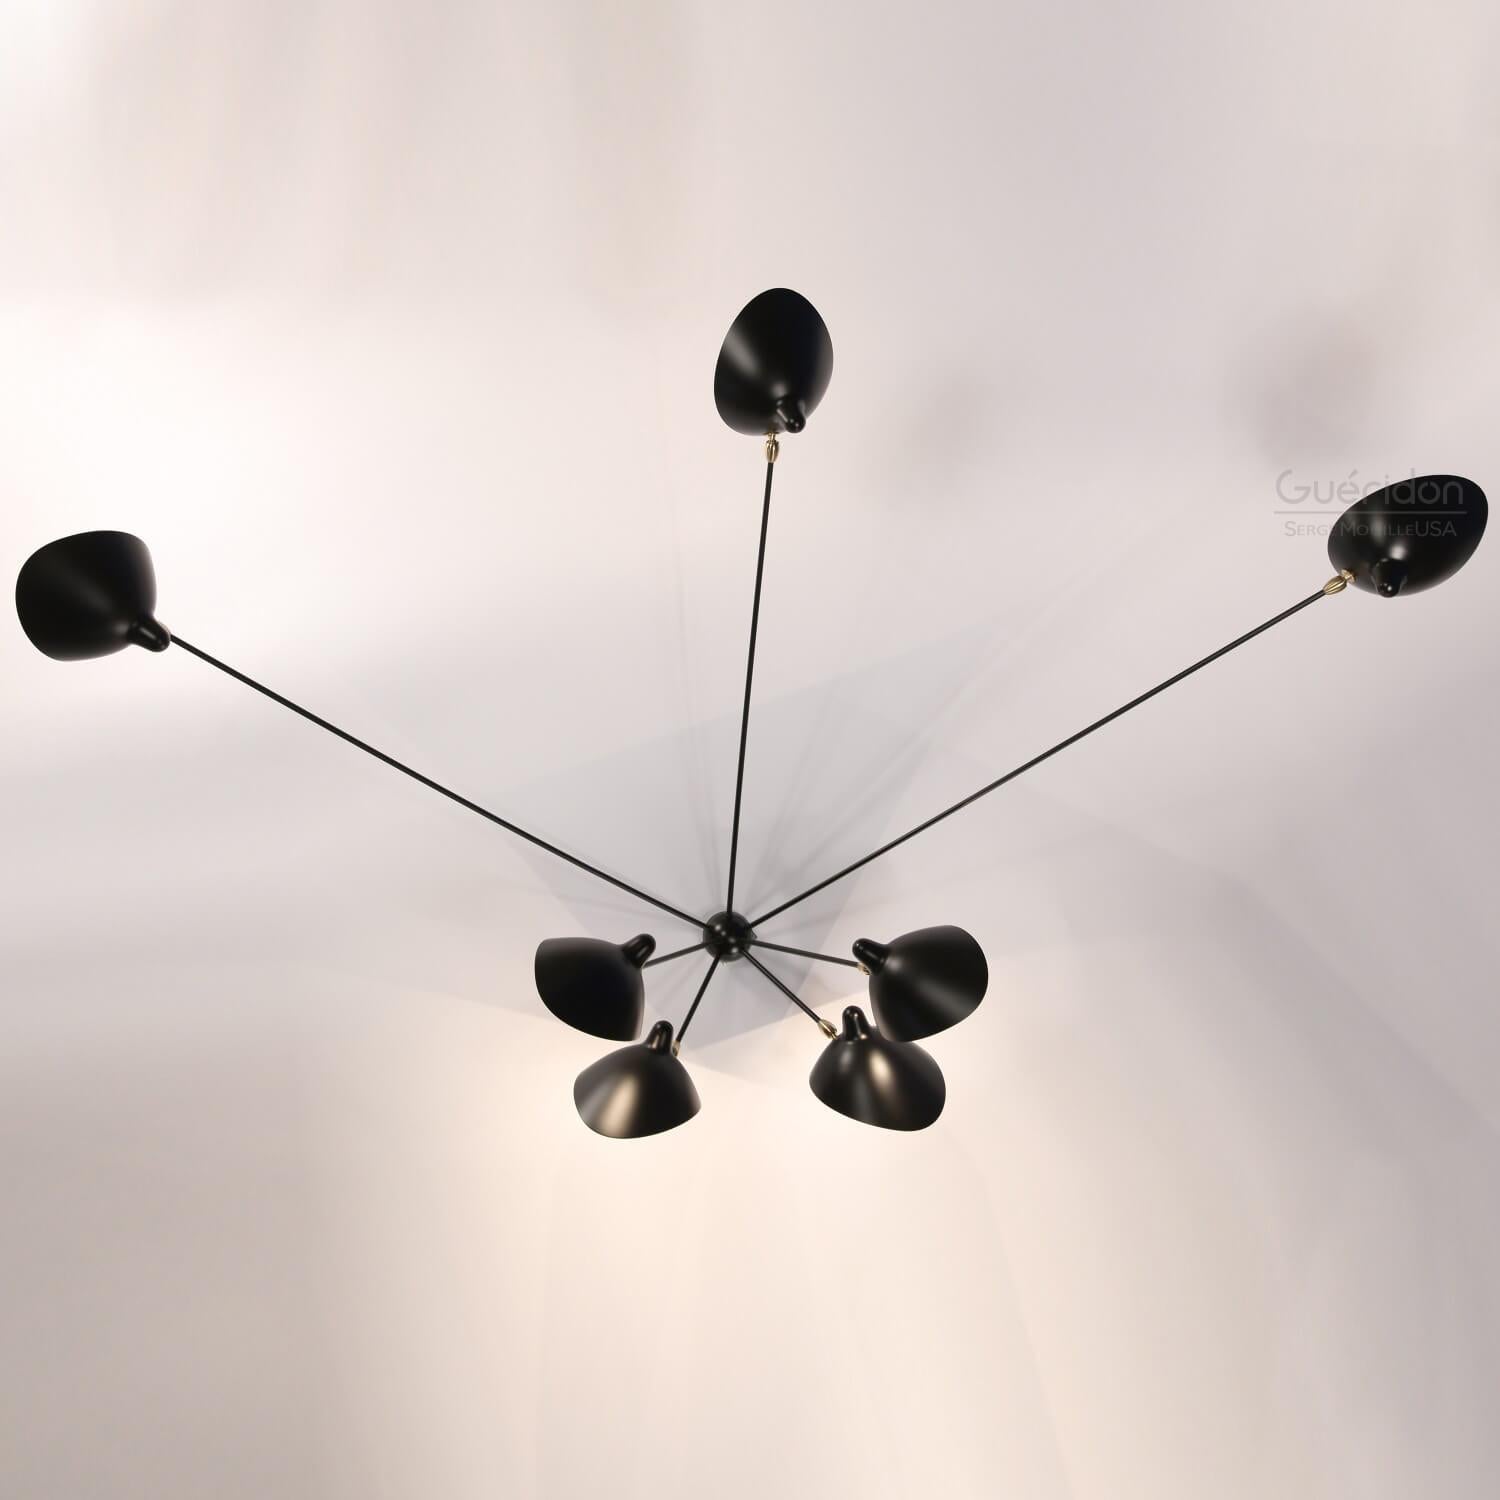 Serge Mouille - Spider Sconce with 7 Arms in Black or White In New Condition For Sale In Stratford, CT